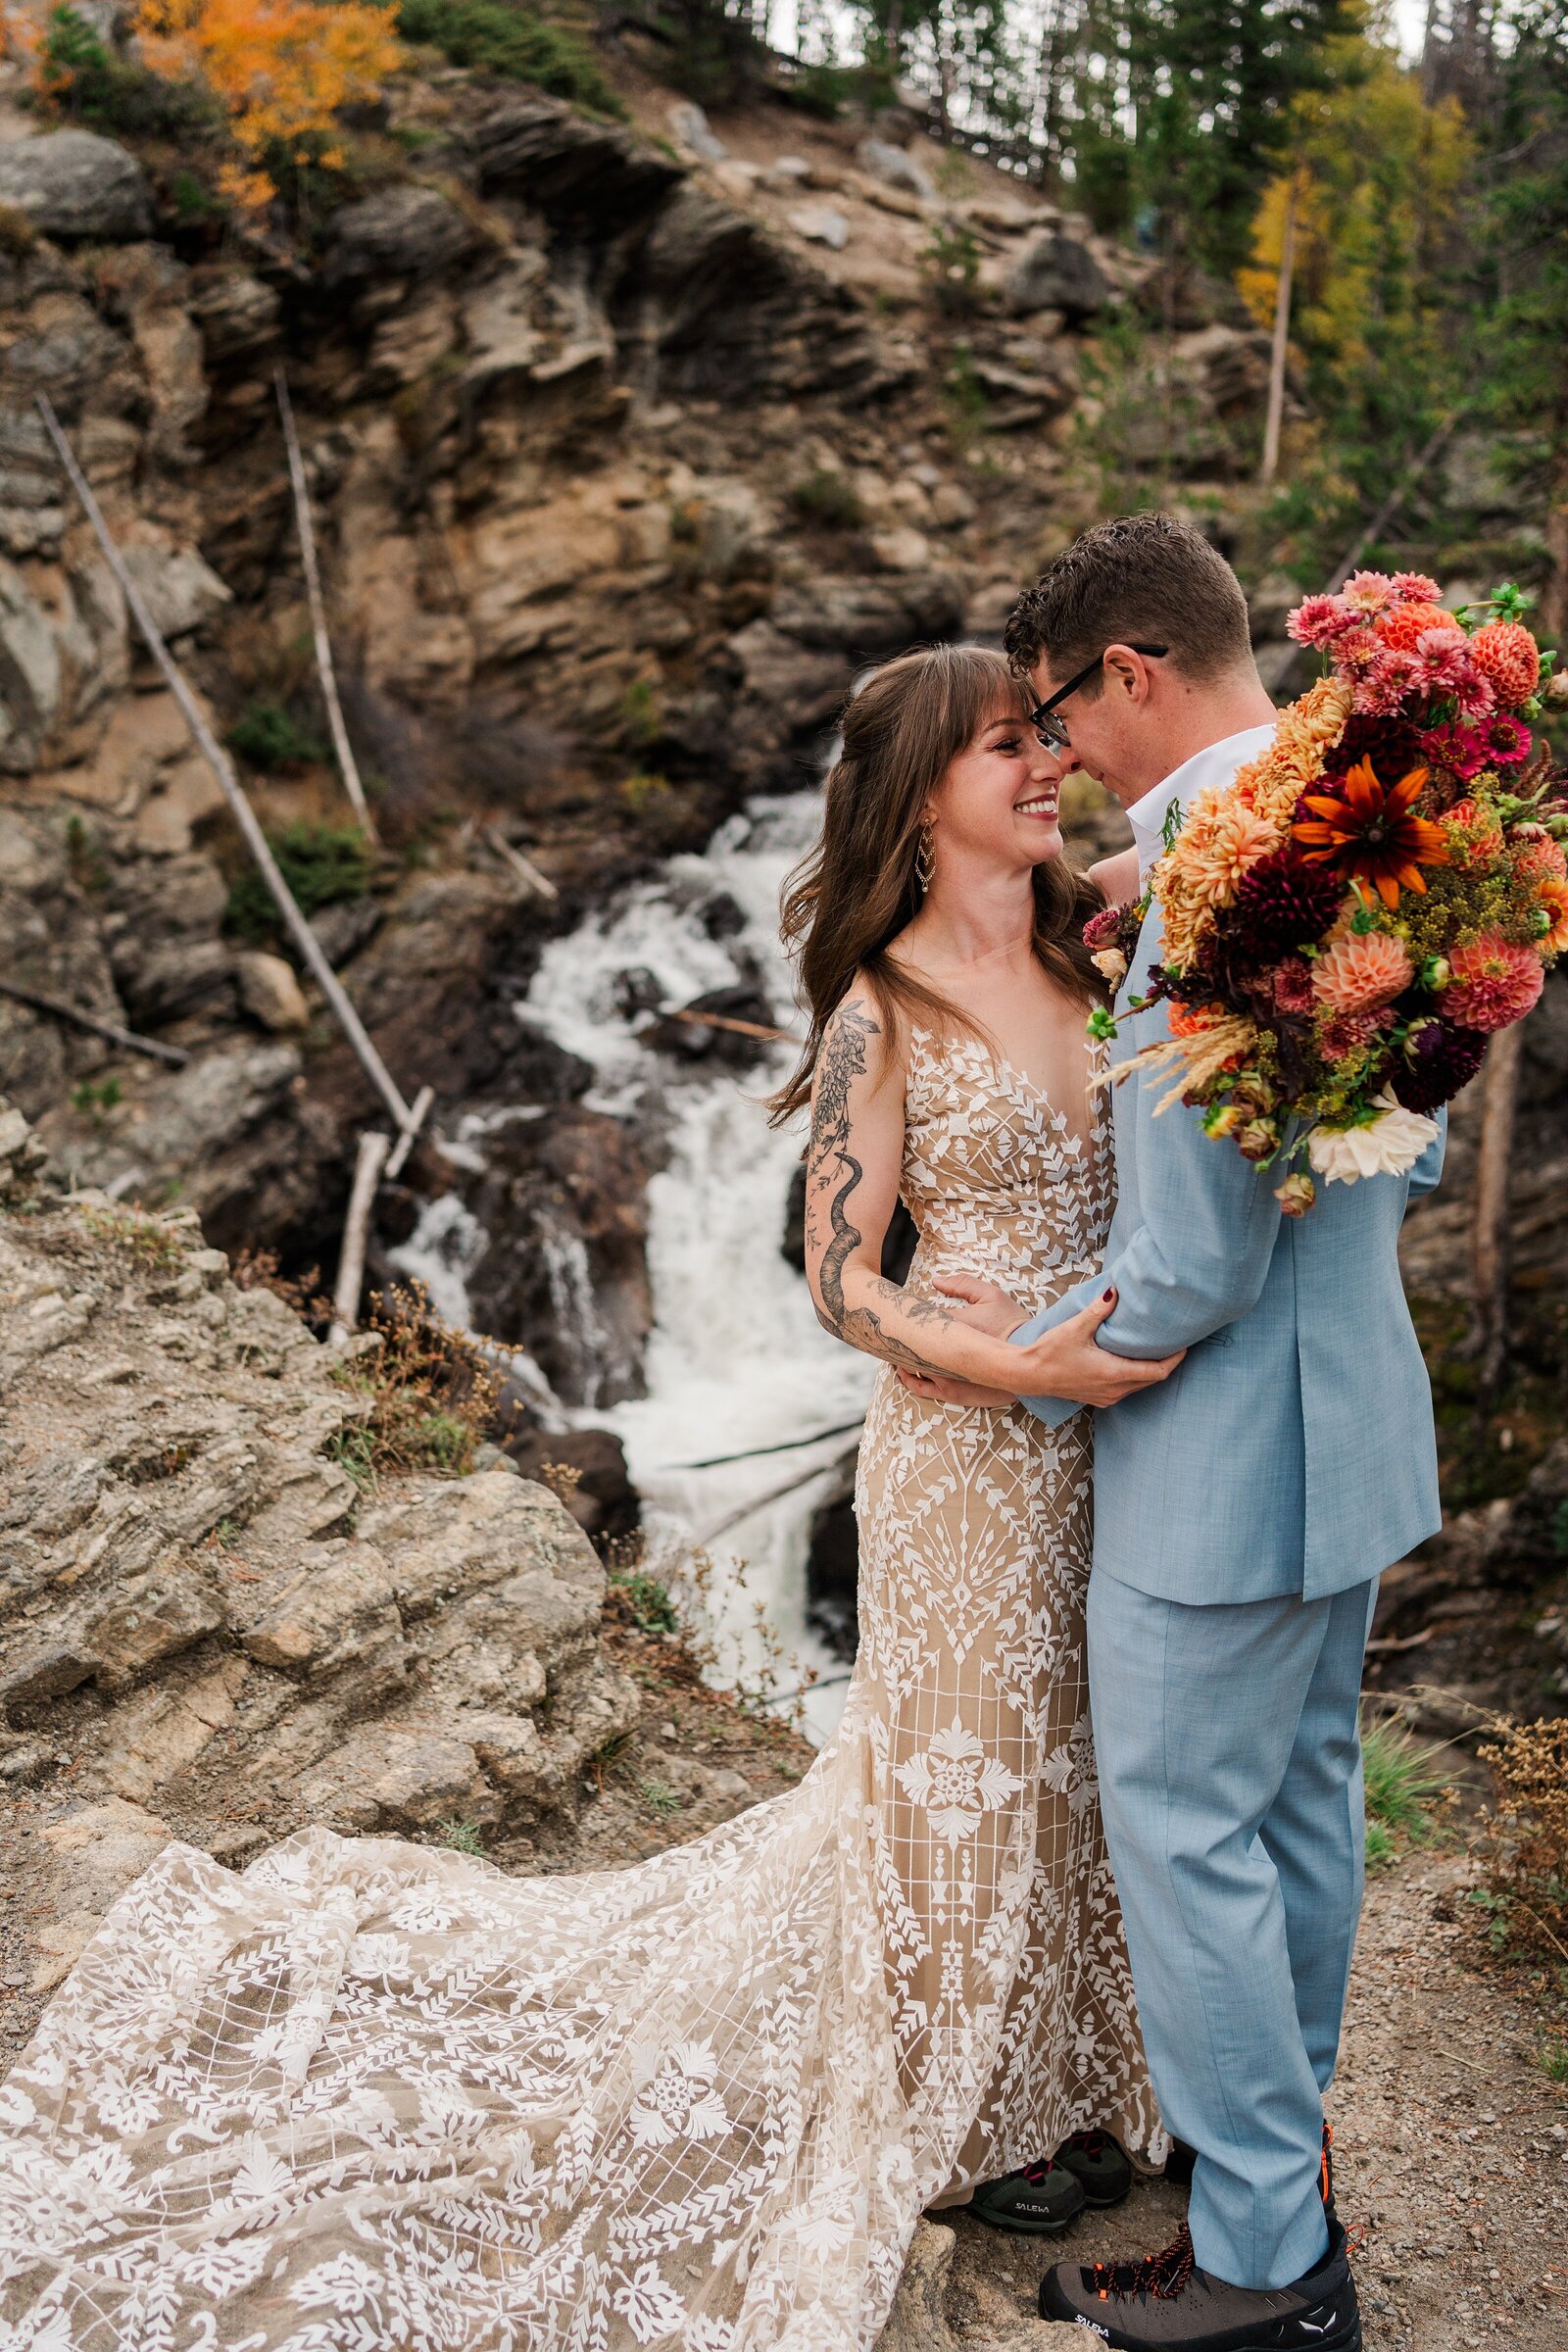 From breathtaking mountain views to intimate outdoor settings, trust Sam Immer Photography to capture your dream Colorado wedding with our expert eye for natural beauty and romantic storytelling